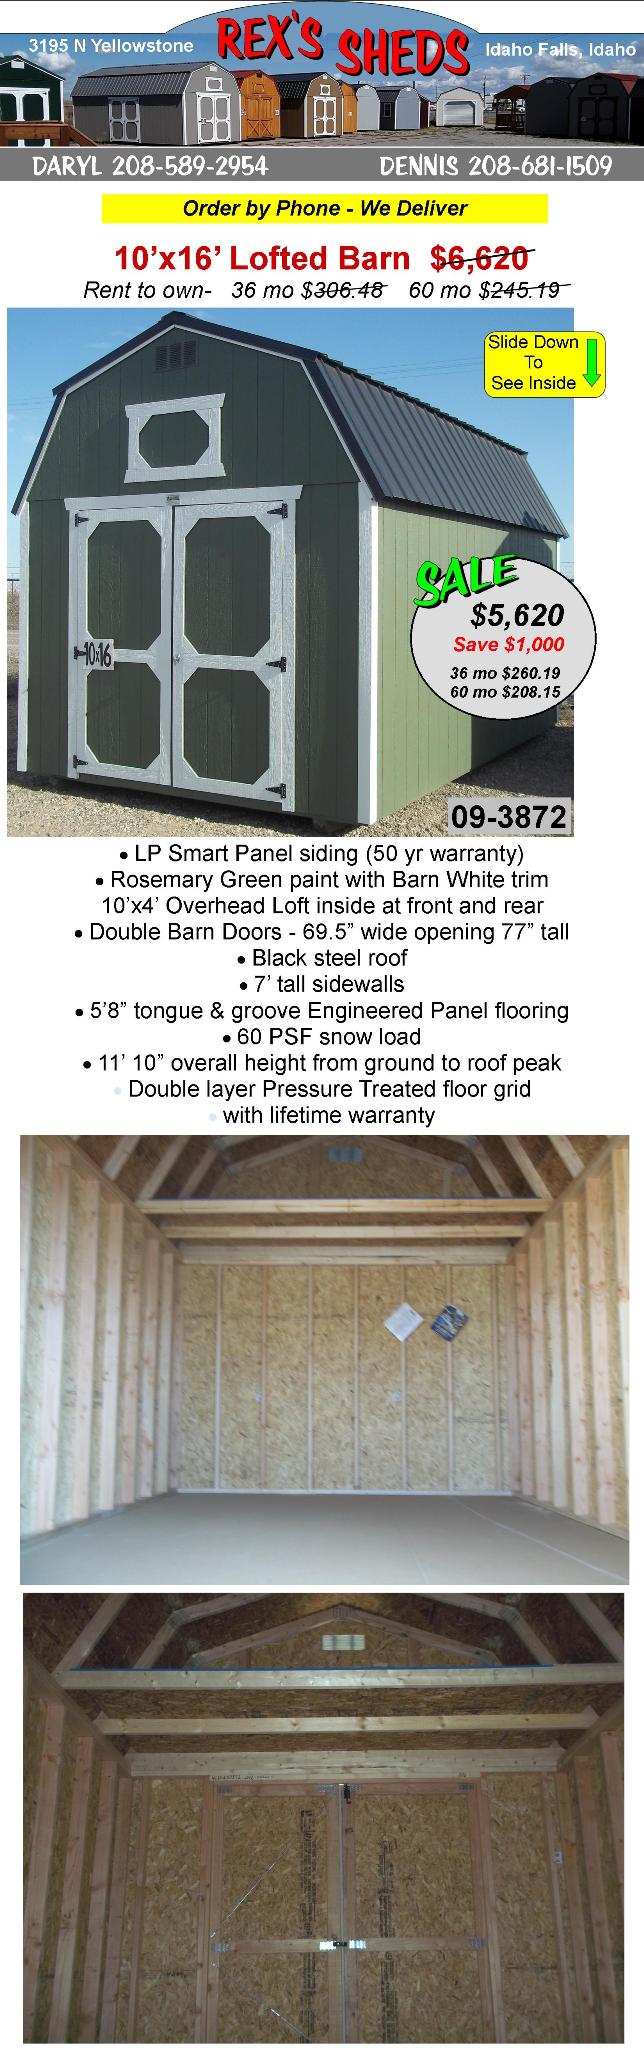 10x16_lofted_barn_shed_with_double_barn_doors_rosemary_grreen_paint_barn_white_trim_black_steel_roof